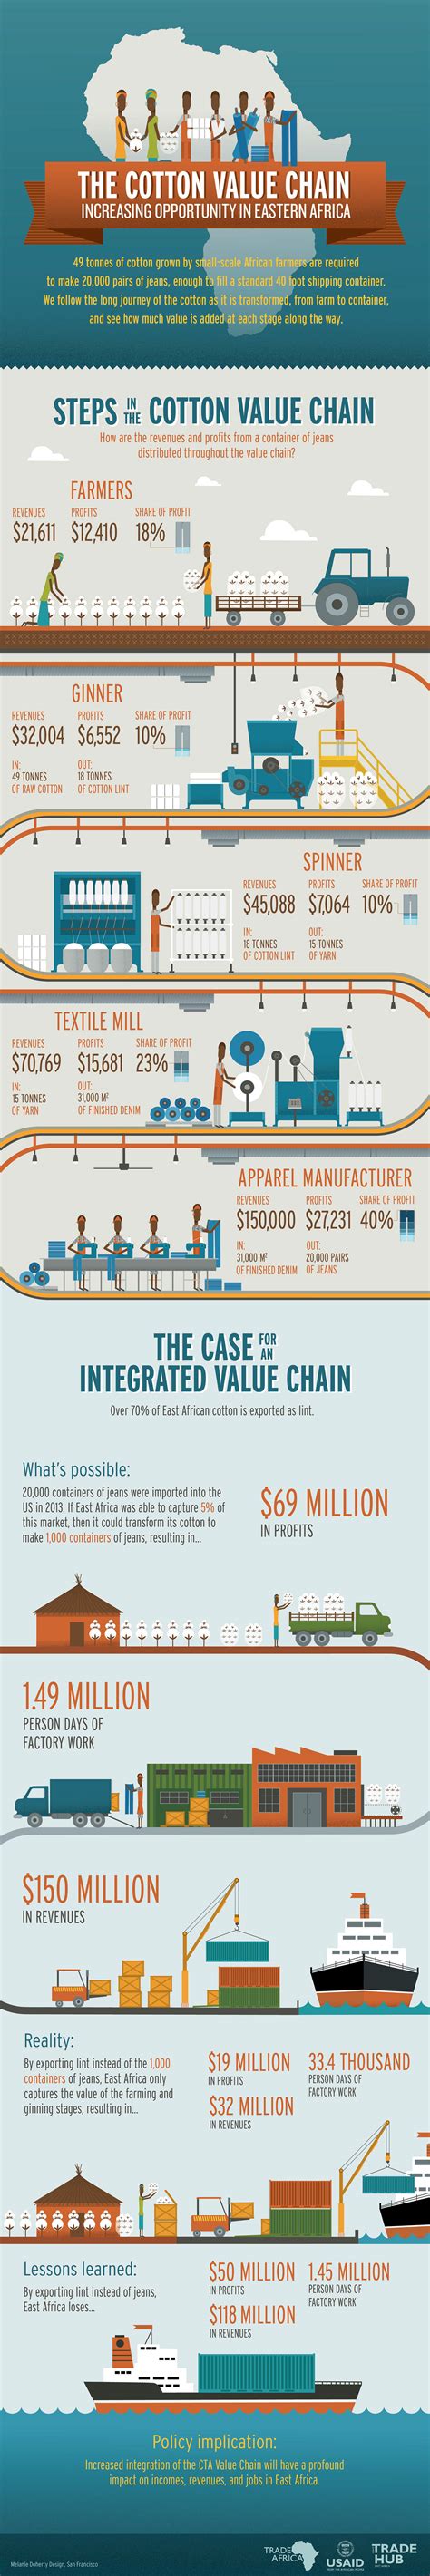 The Cotton Value Chain Infographic On Behance